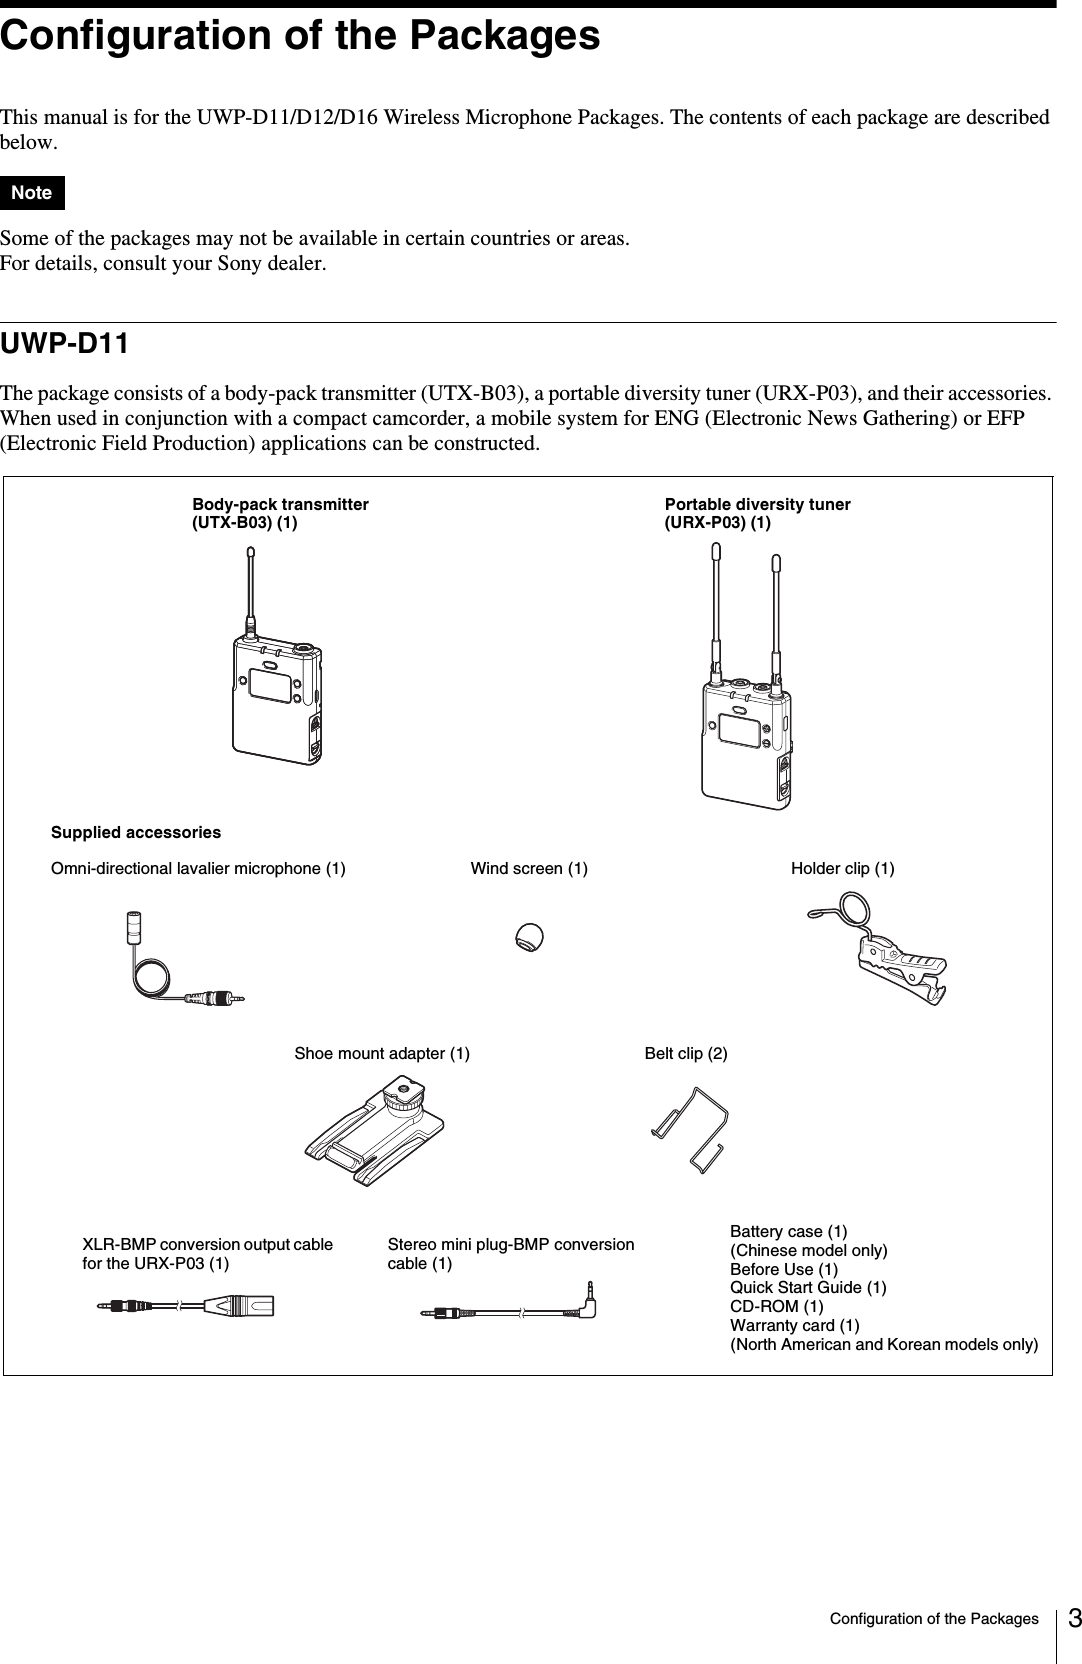 Configuration of the Packages 3Configuration of the PackagesThis manual is for the UWP-D11/D12/D16 Wireless Microphone Packages. The contents of each package are described below.Some of the packages may not be available in certain countries or areas.For details, consult your Sony dealer.UWP-D11The package consists of a body-pack transmitter (UTX-B03), a portable diversity tuner (URX-P03), and their accessories. When used in conjunction with a compact camcorder, a mobile system for ENG (Electronic News Gathering) or EFP (Electronic Field Production) applications can be constructed.NoteBody-pack transmitter (UTX-B03) (1)Portable diversity tuner (URX-P03) (1)Supplied accessoriesWind screen (1)Omni-directional lavalier microphone (1) Holder clip (1)Shoe mount adapter (1) Belt clip (2)Battery case (1) (Chinese model only)Before Use (1)Quick Start Guide (1)CD-ROM (1)Warranty card (1) (North American and Korean models only)Stereo mini plug-BMP conversion cable (1)XLR-BMP conversion output cable for the URX-P03 (1)